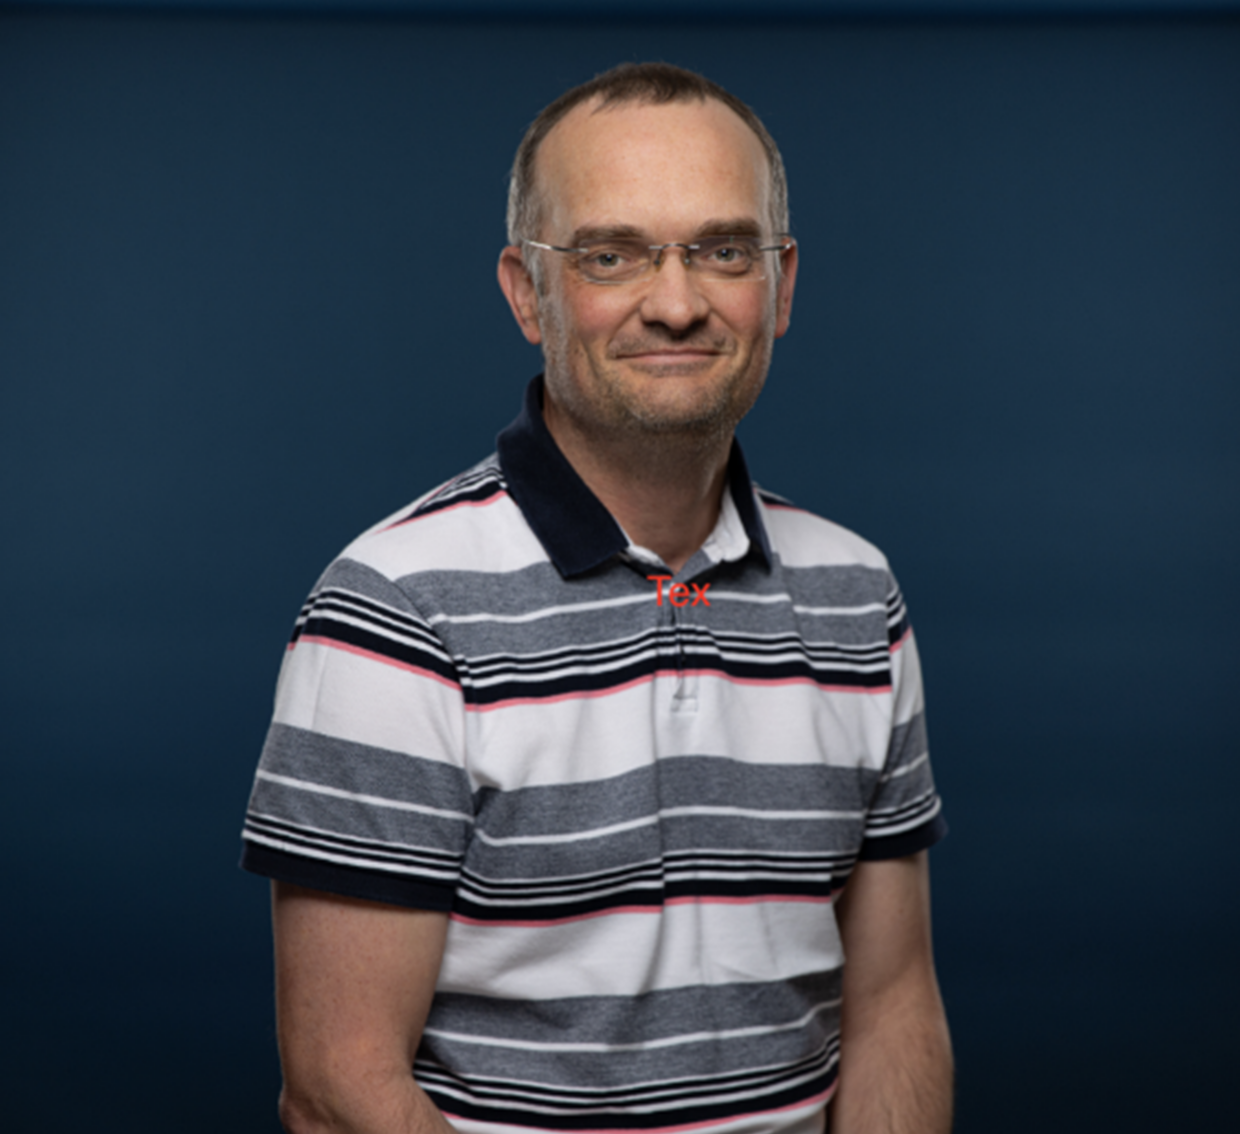 A professional photo of Neil. Neil has short hair and glasses. Neil is wearing a black, white and grey stripped polo shirt